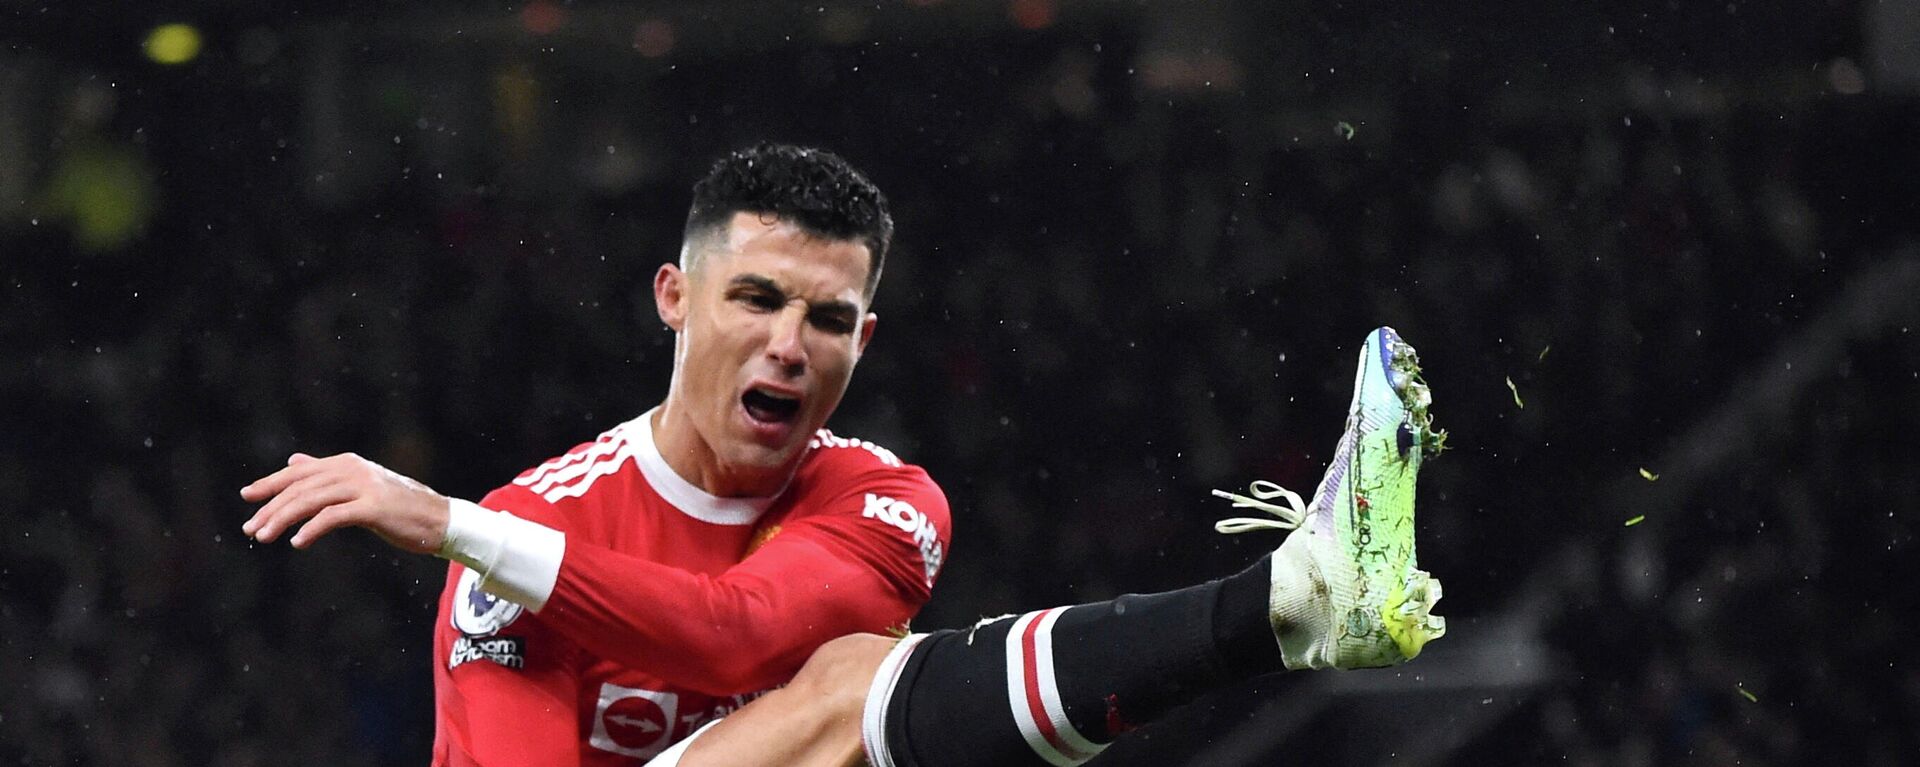 Soccer Football - Premier League - Manchester United v Brighton & Hove Albion - Old Trafford, Manchester, Britain - February 15, 2022  Manchester United's Cristiano Ronaldo reacts after missing a chance to score - Sputnik International, 1920, 06.03.2022